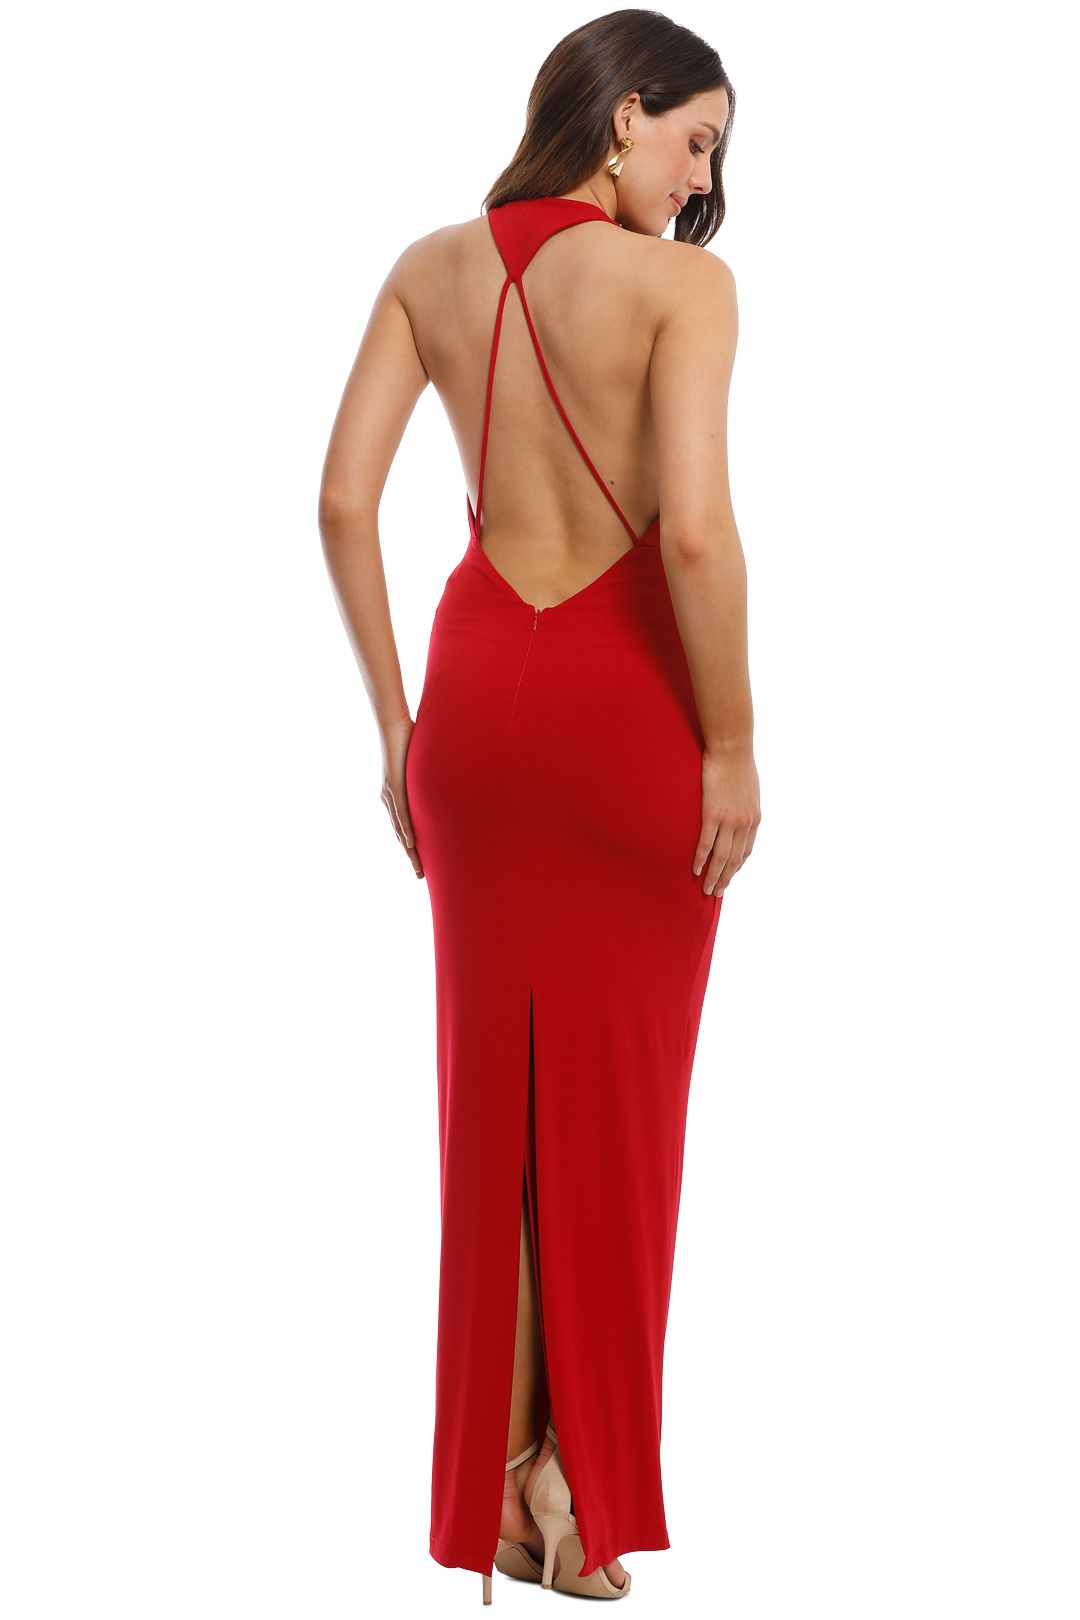 George - Priscilla Gown - Red - Back